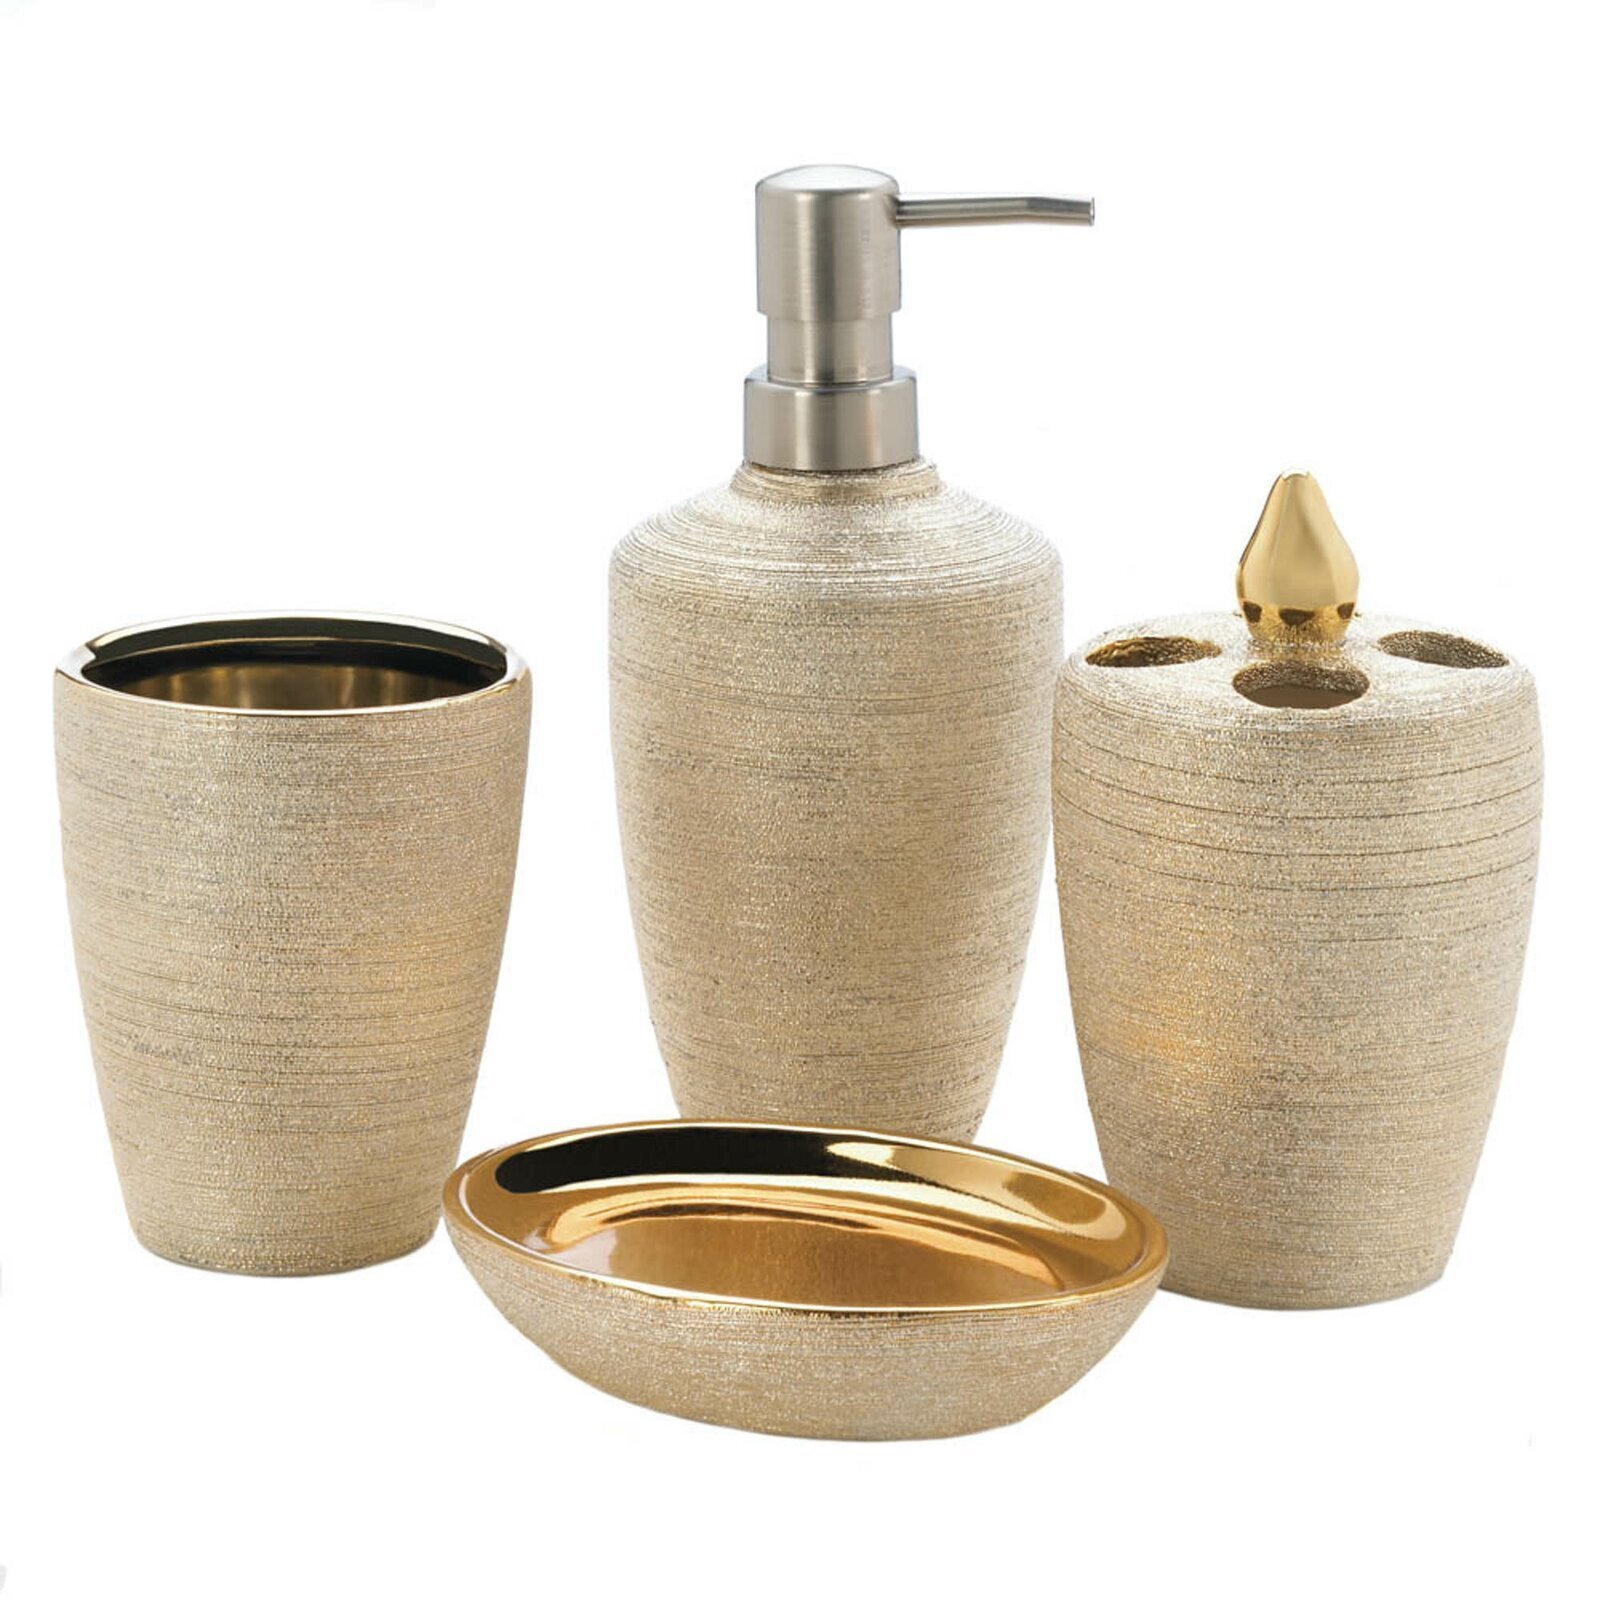 Shimmer Bathroom Accessories in Gold